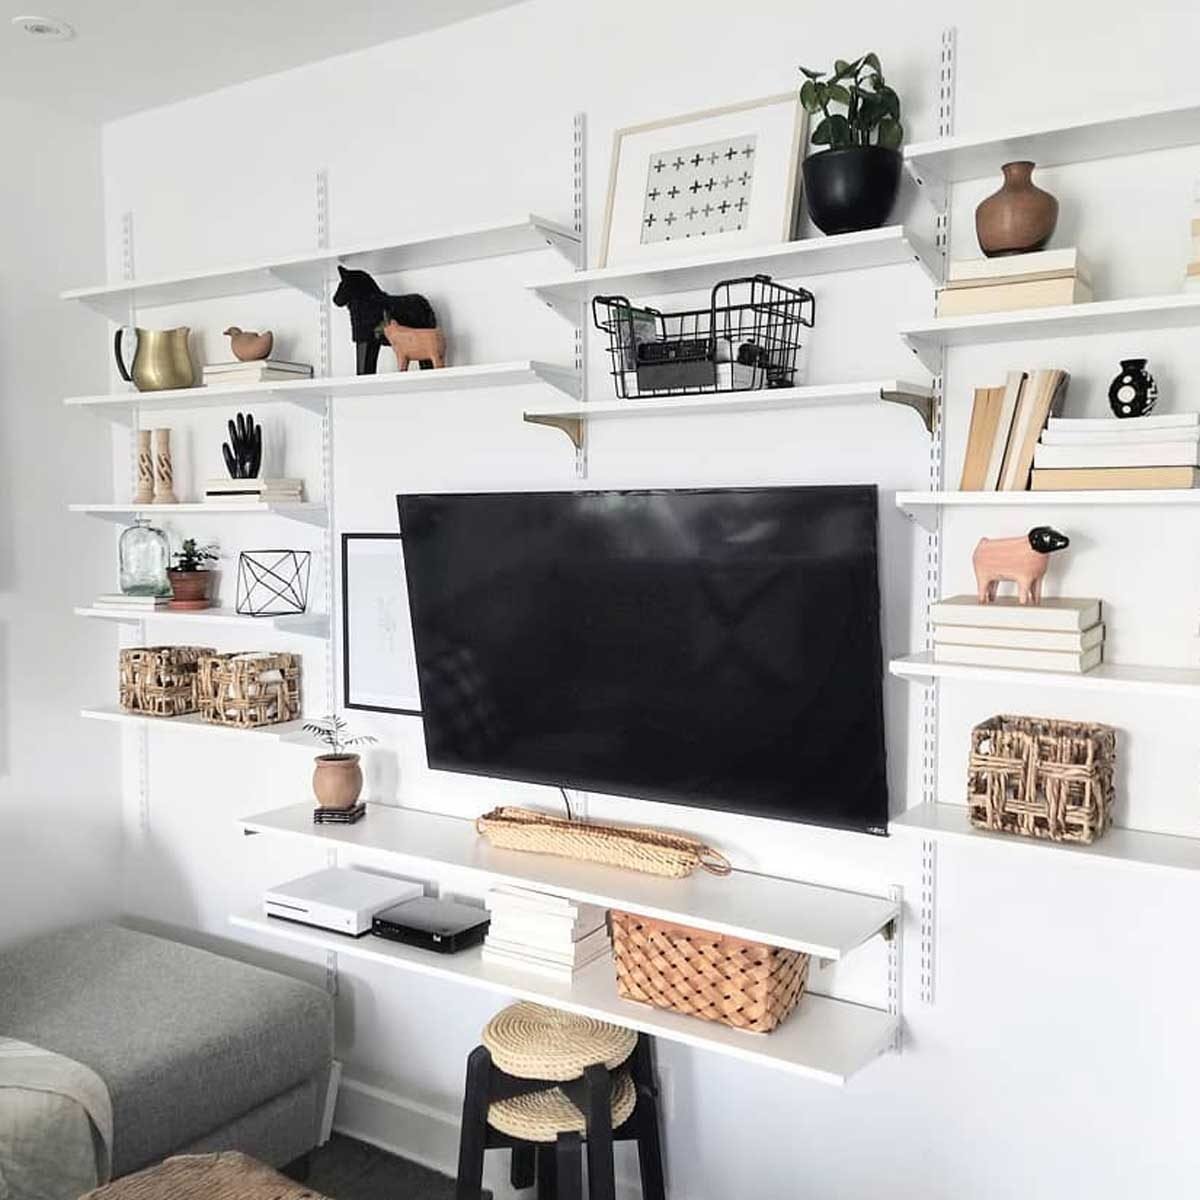 8 Spaces that Make Track Shelving Look Good